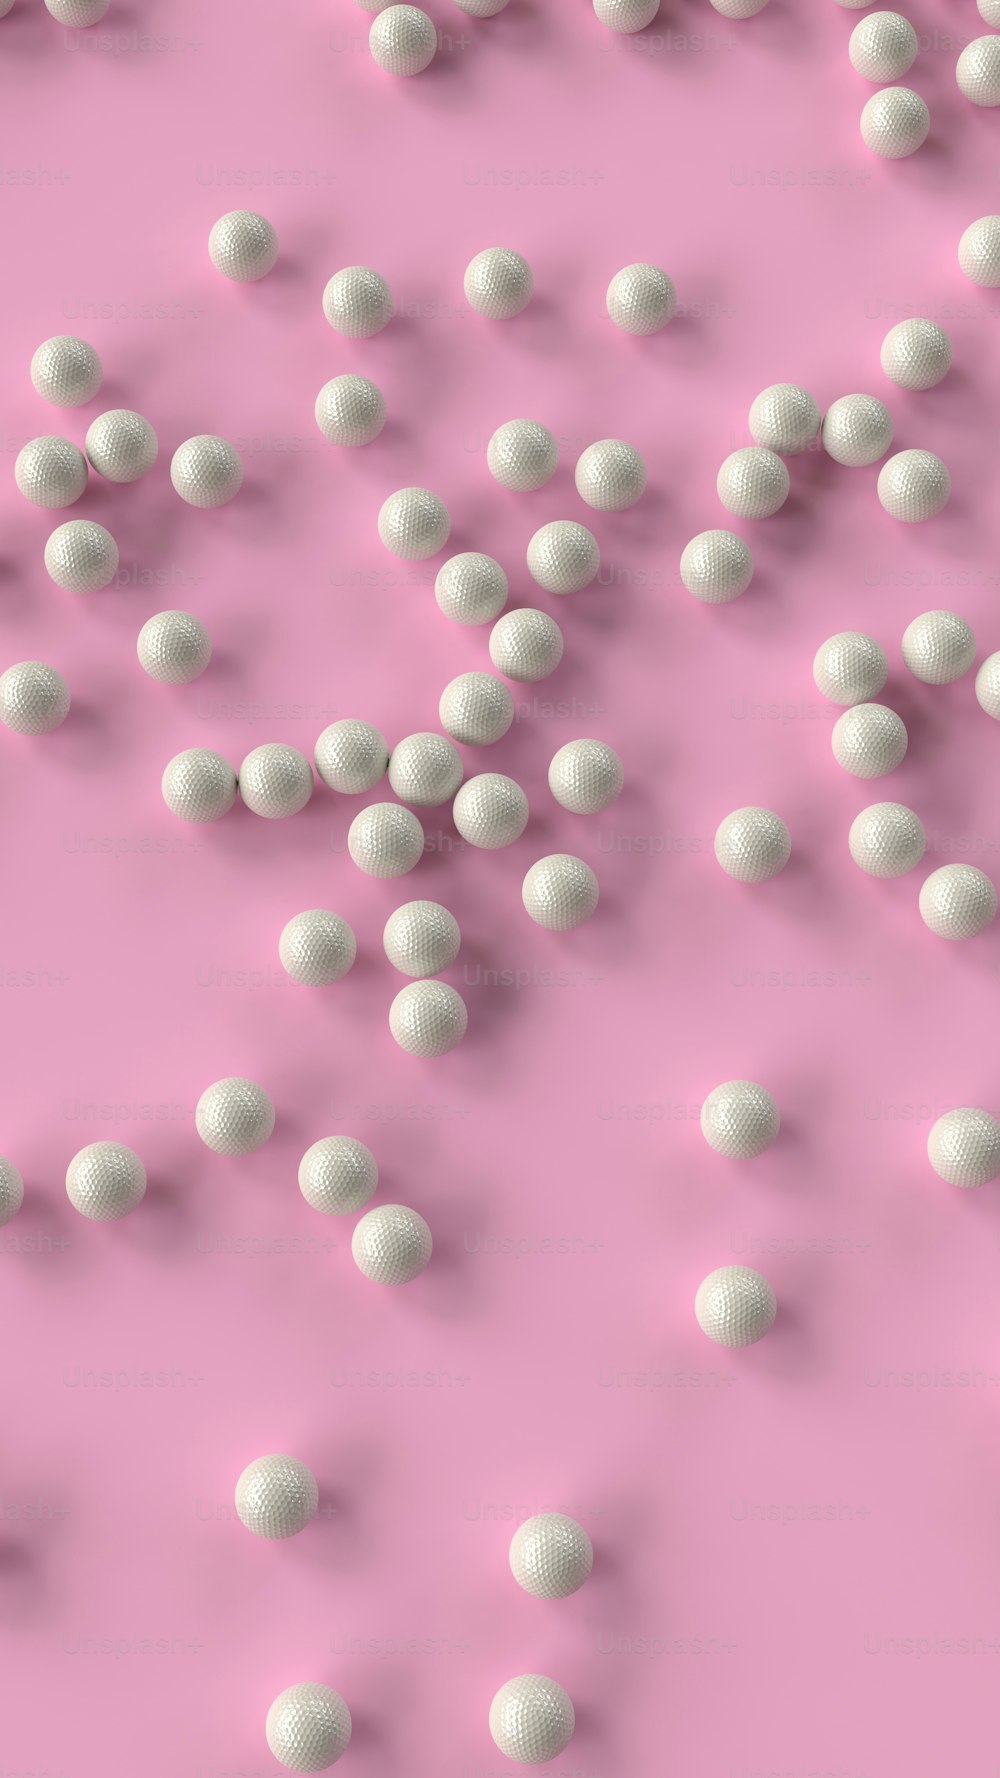 a bunch of white balls floating on top of a pink surface